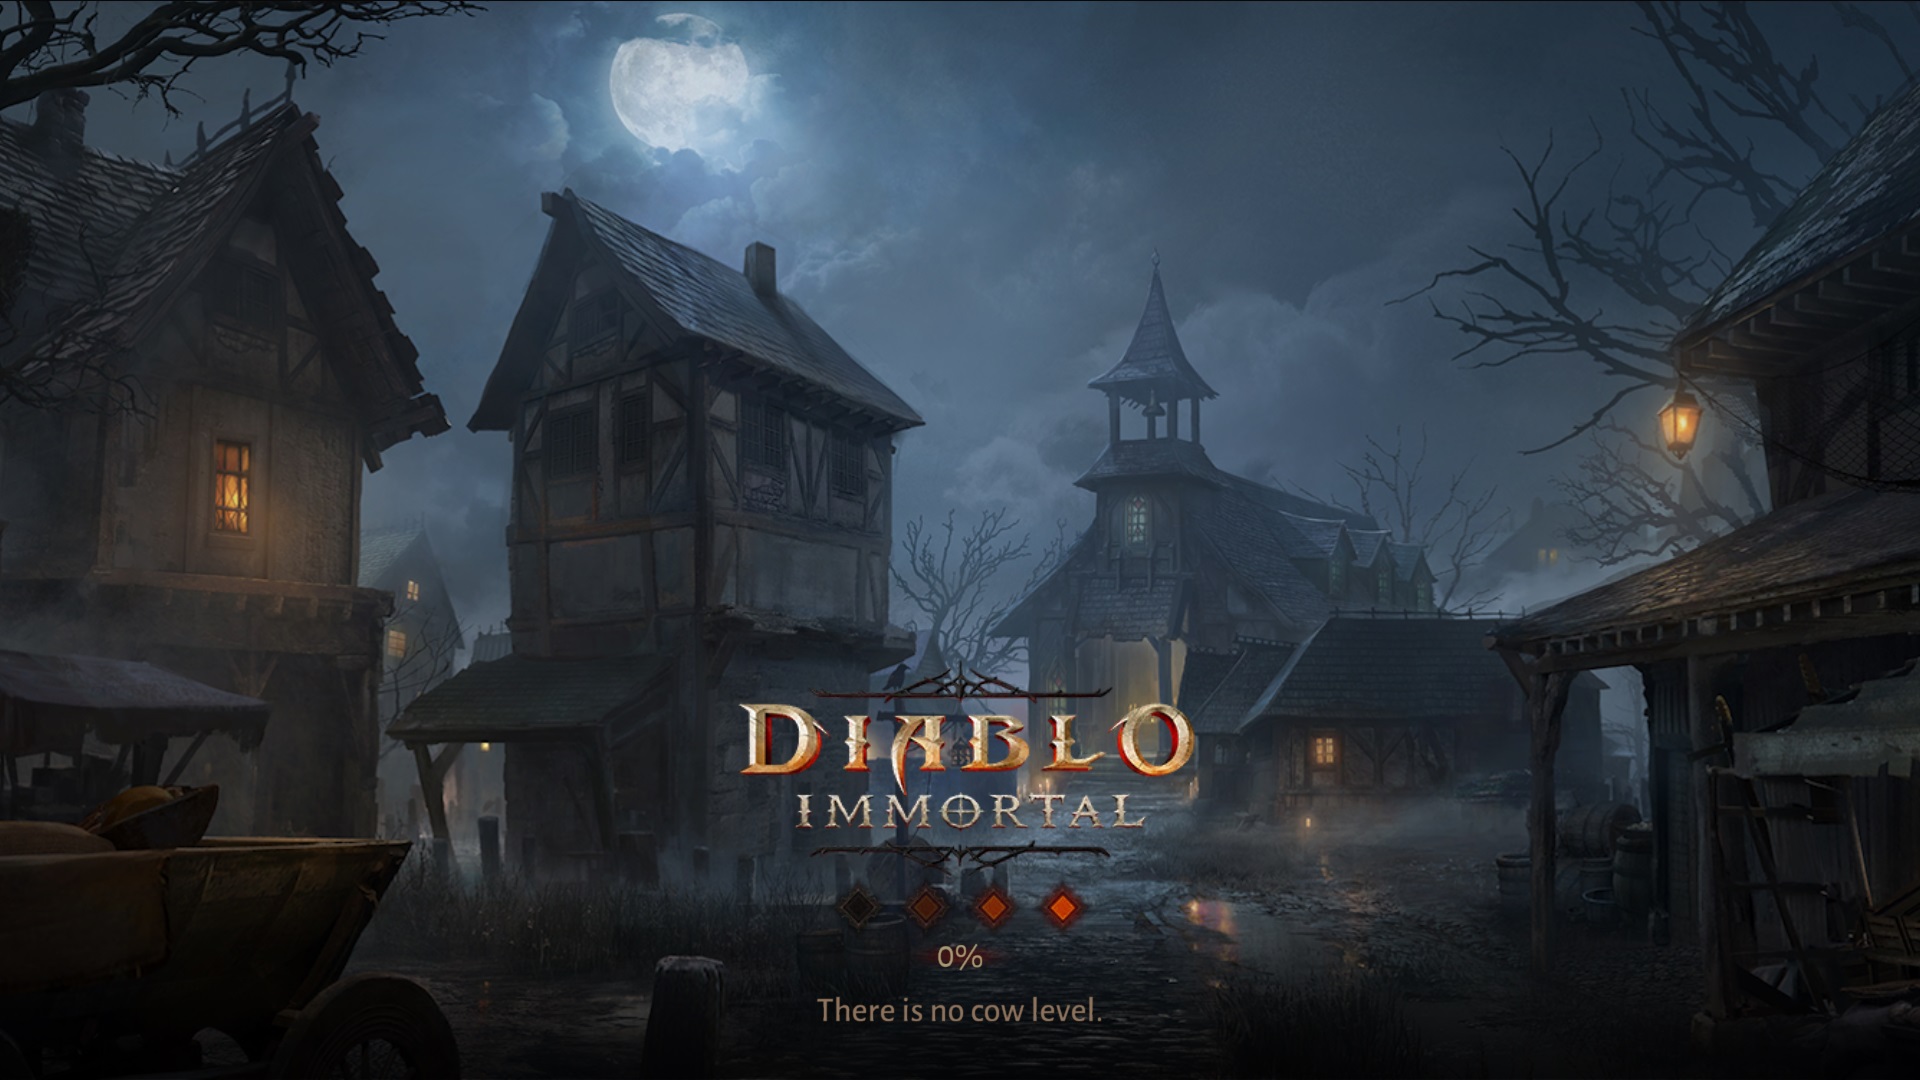 Diablo Immortal: What is Cow Level and is there Cow Level in-game?